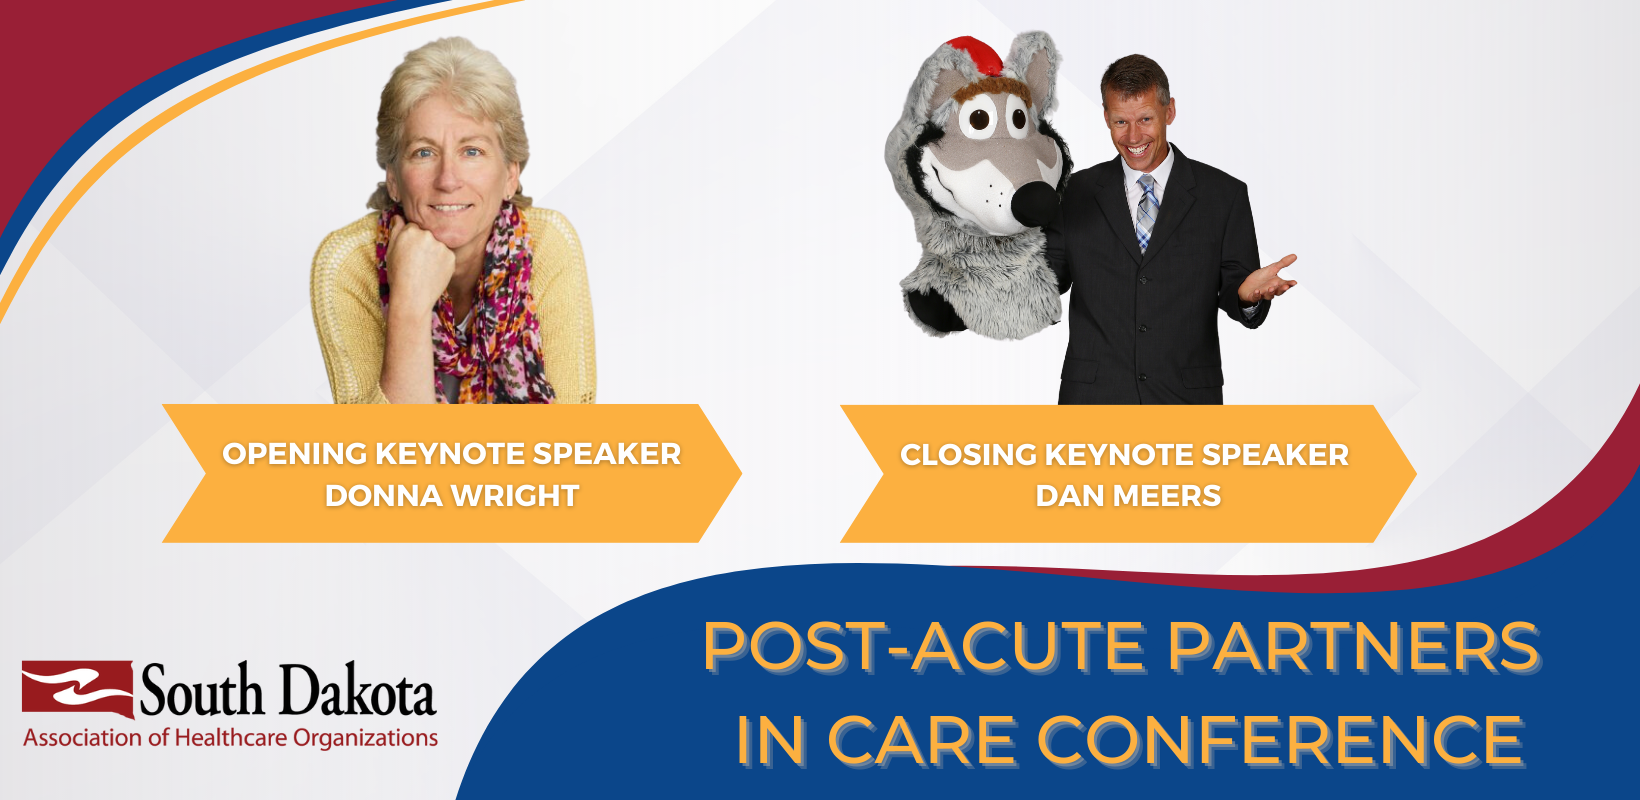 SDAHO’s PostAcute Care Conference Offering Educational Opportunities, Networking and an